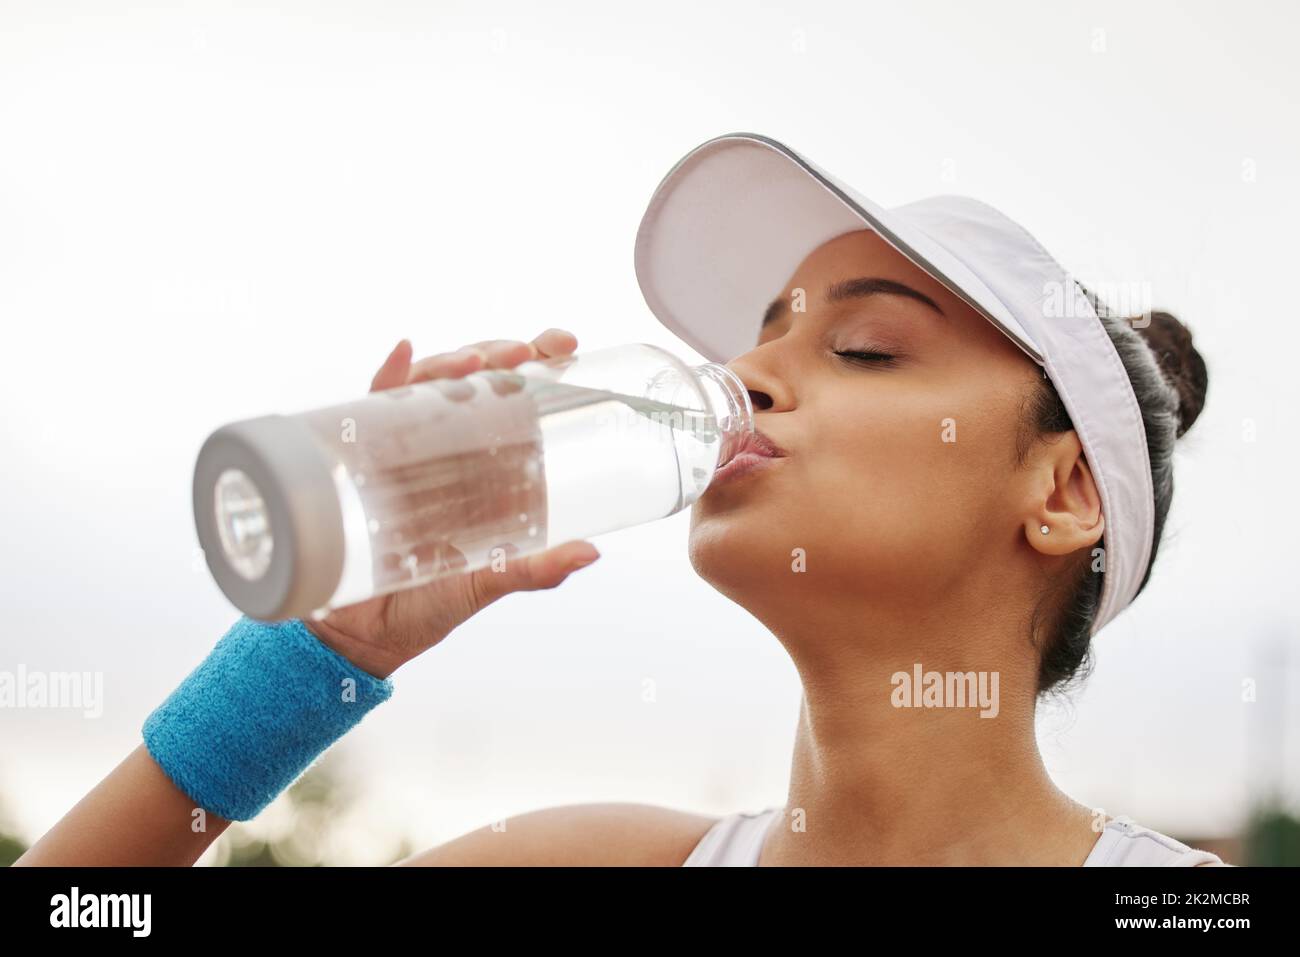 https://c8.alamy.com/comp/2K2MCBR/theres-no-better-way-to-quench-your-thirst-shot-of-a-beautiful-young-woman-drinking-a-bottle-of-water-while-out-playing-tennis-2K2MCBR.jpg